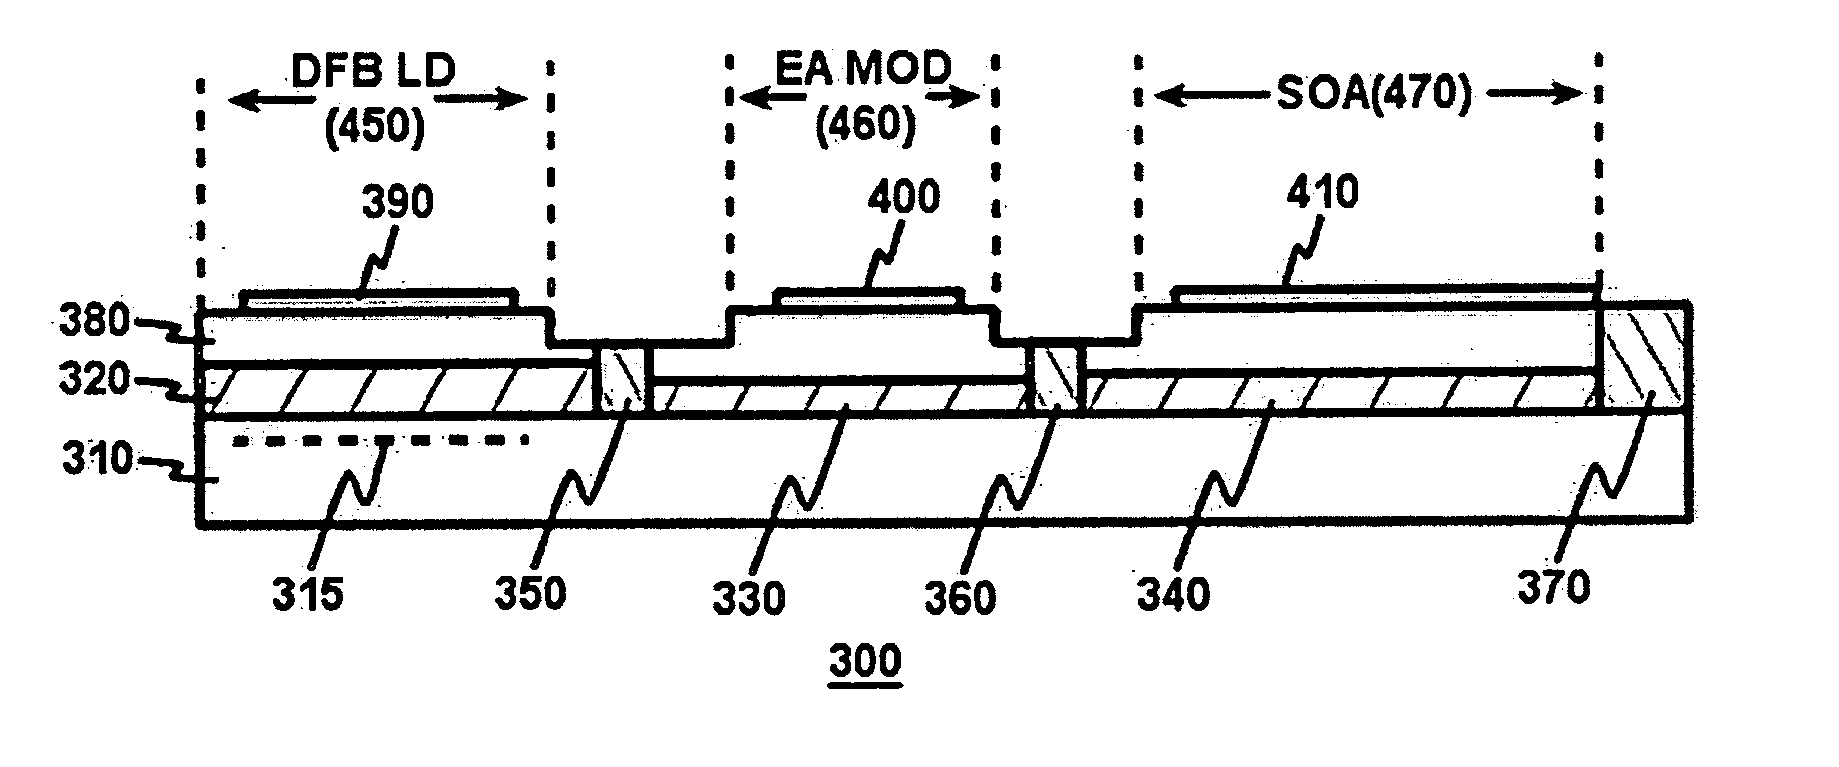 Semiconductor monolithic integrated optical transmitter